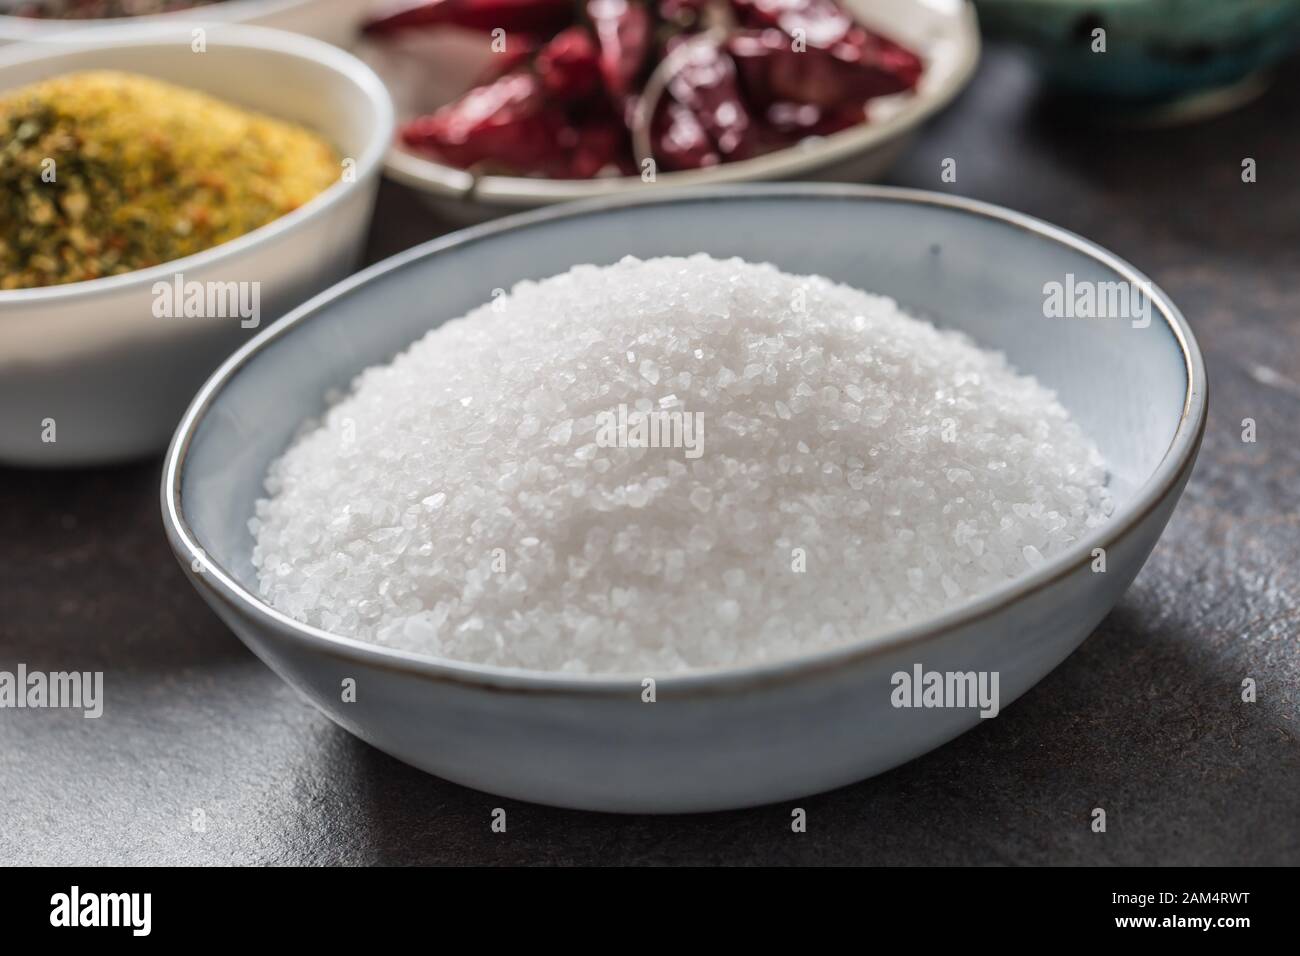 Salt and variety spices and herbs in bowls Stock Photo